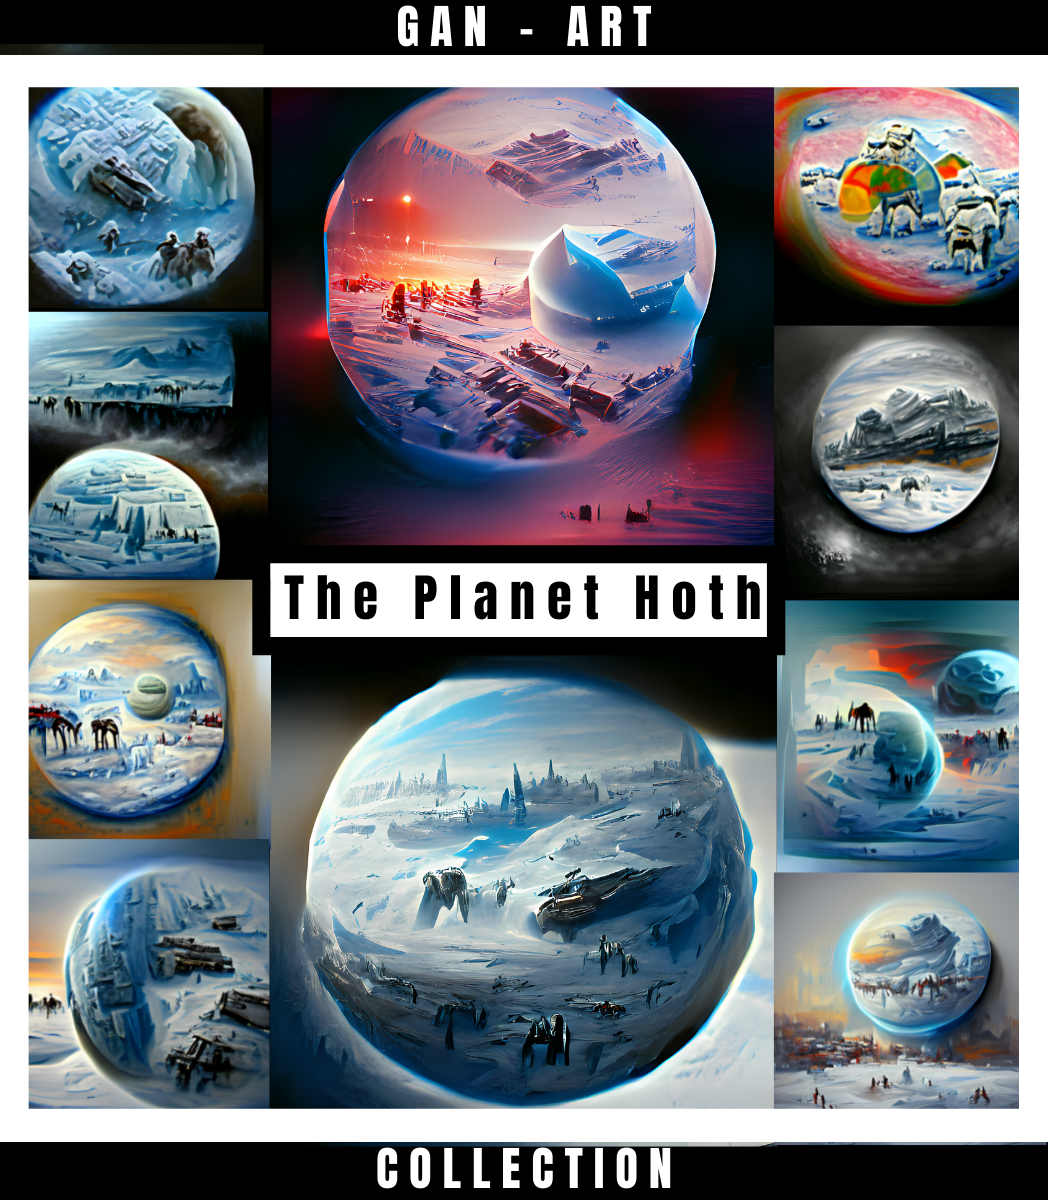 The Planet Hoth